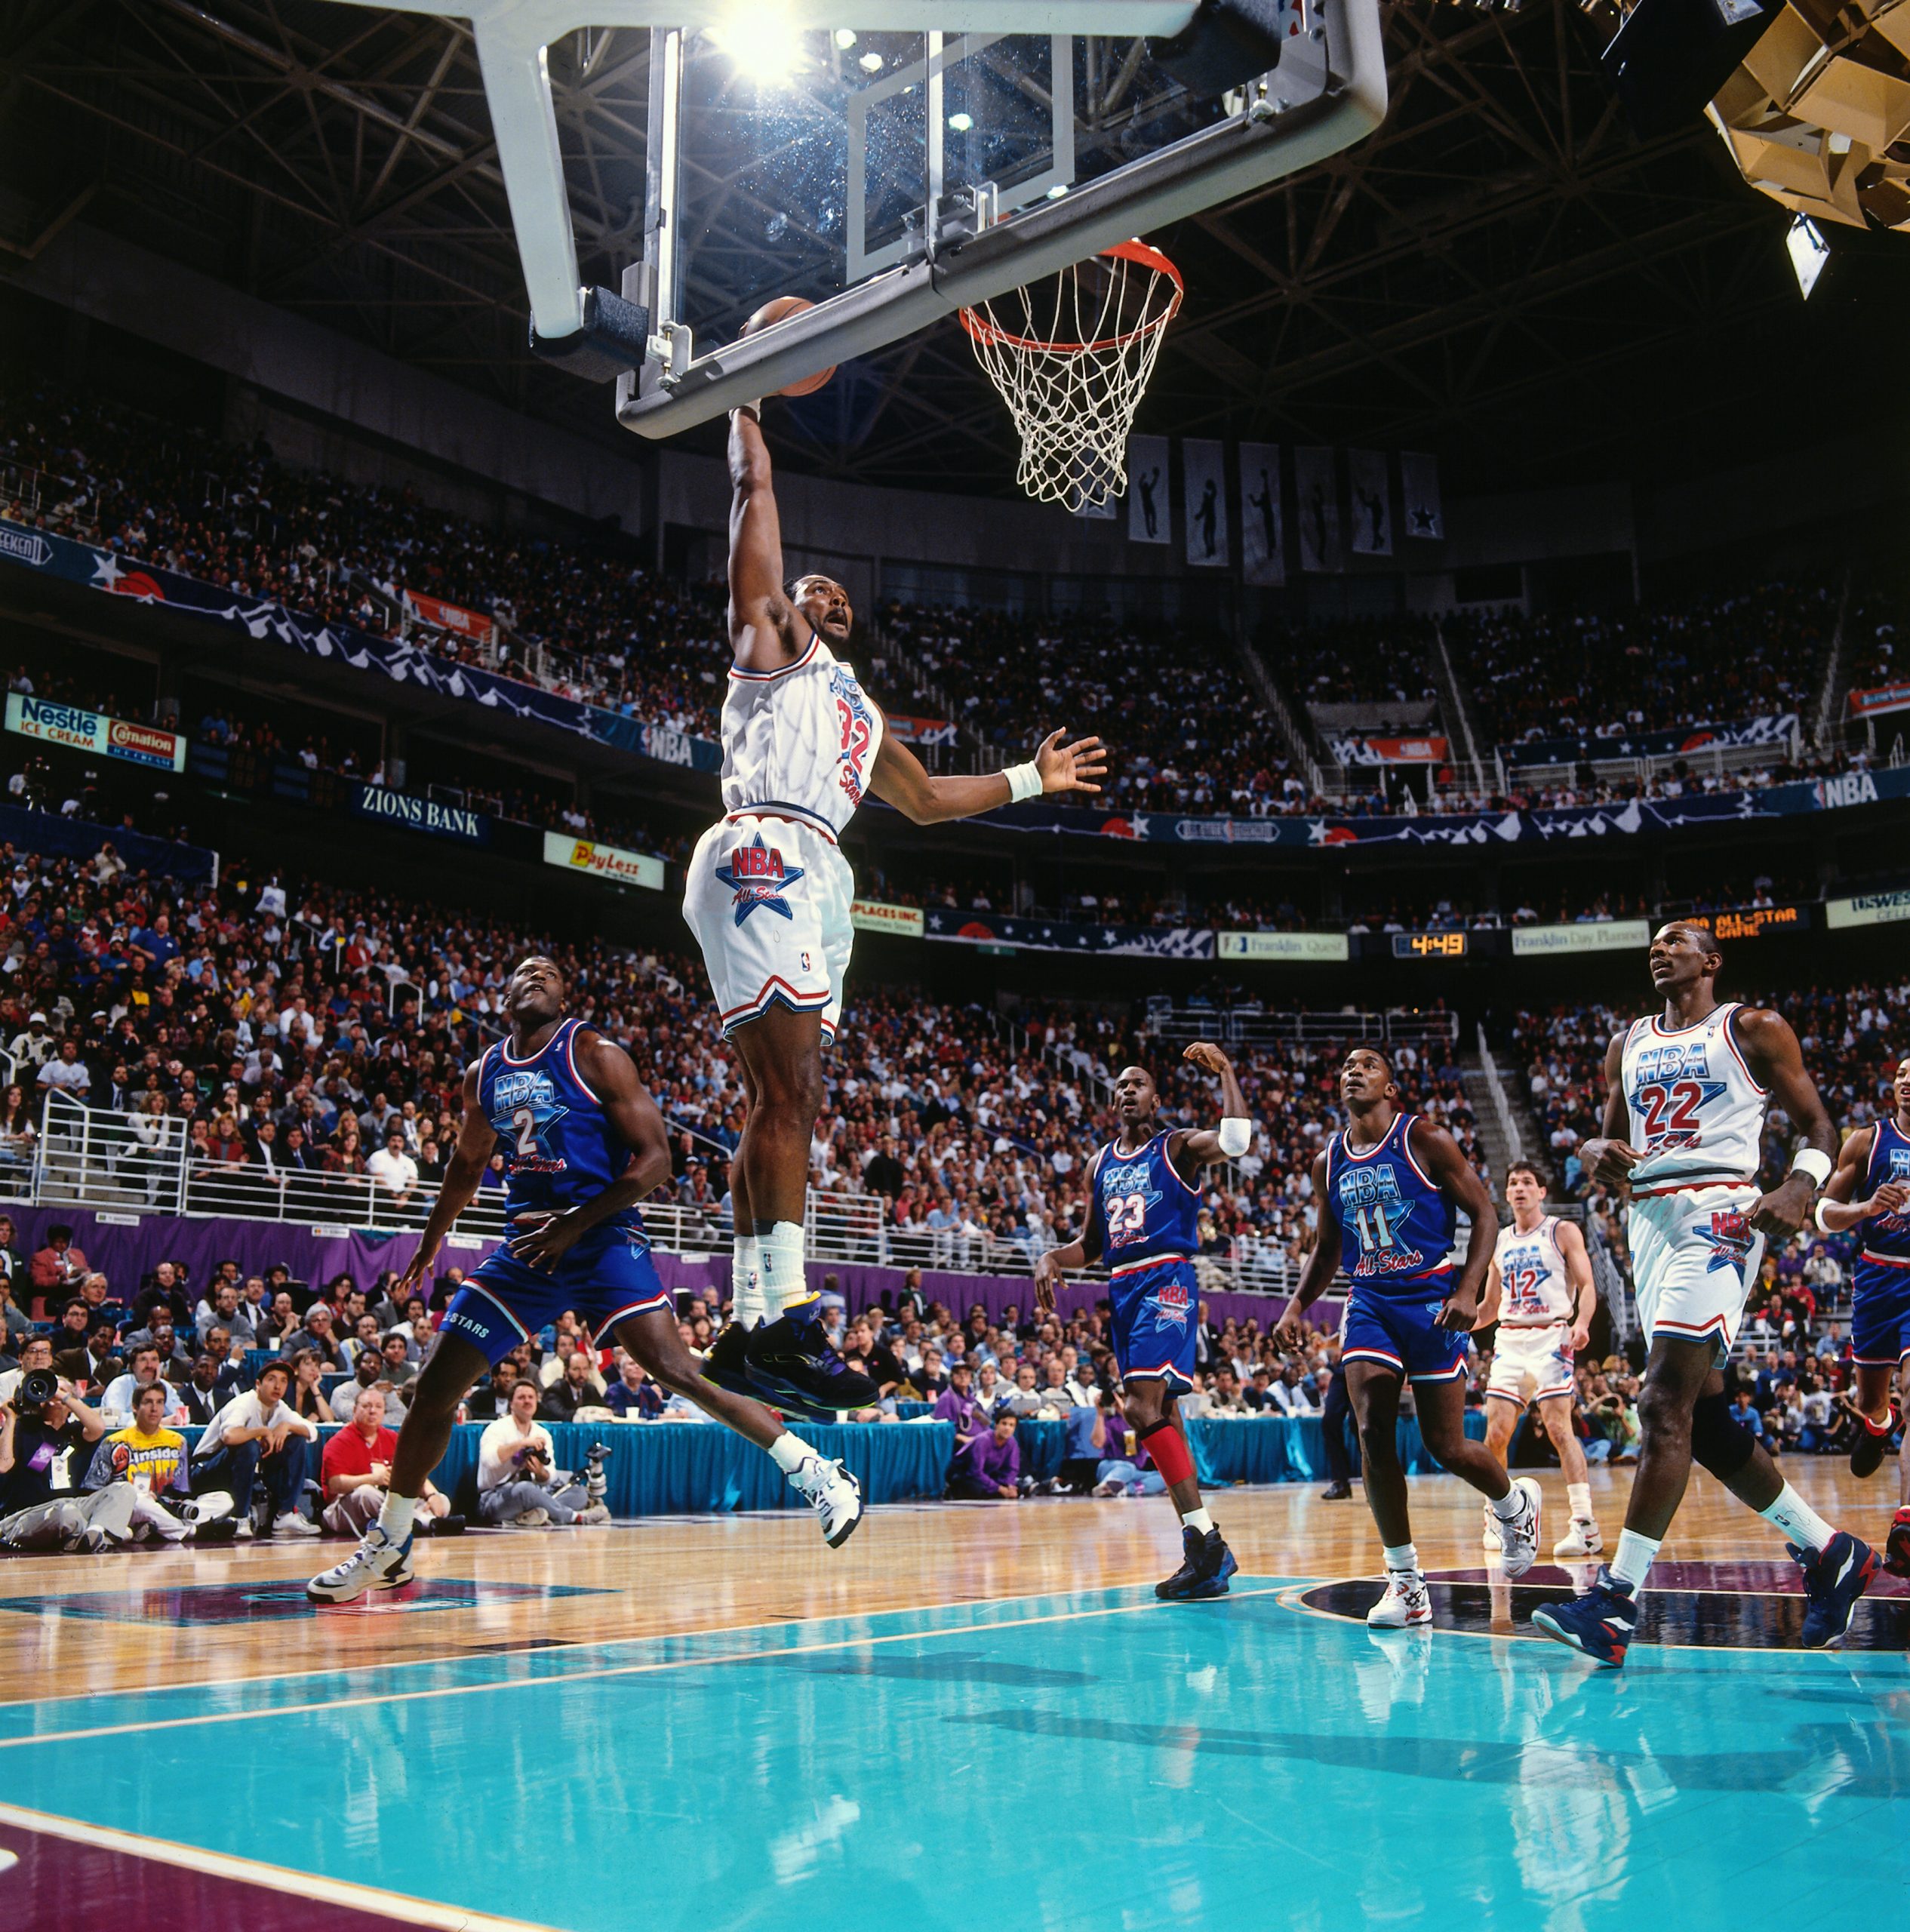 1993 NBA All-Star Game a special moment for Utah - The Salt Lake